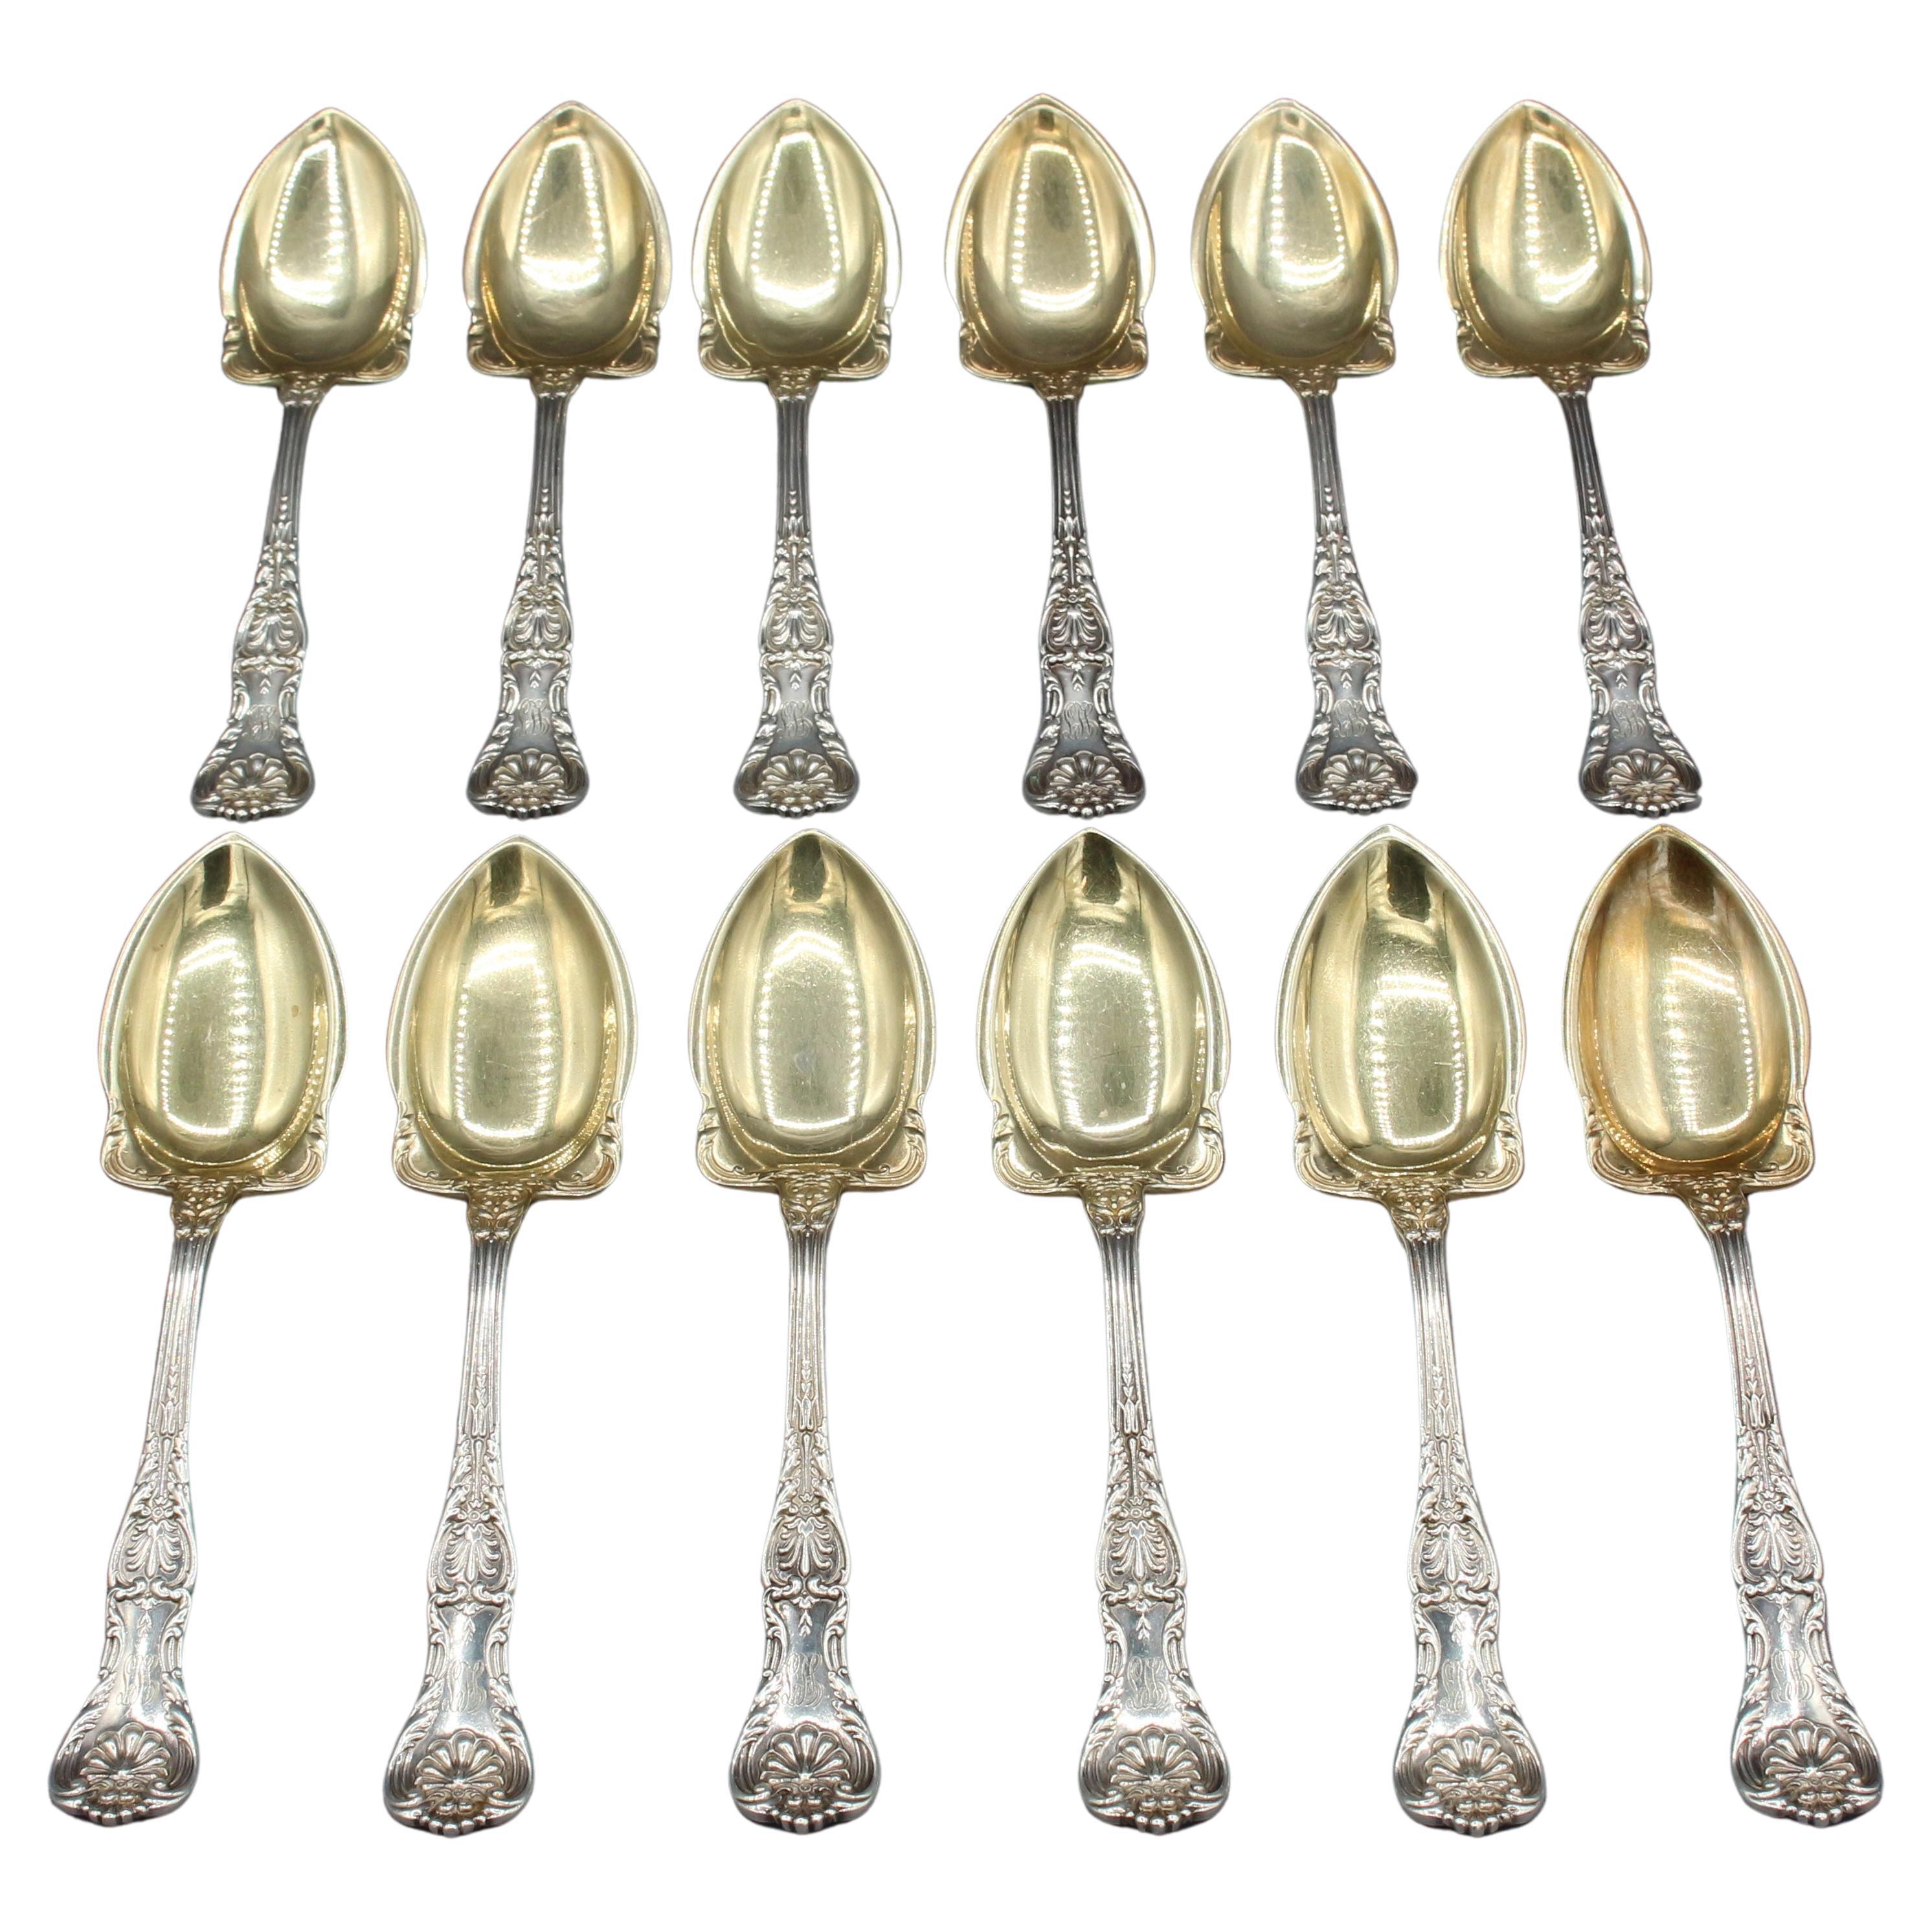 1904 Set of 12 Sterling Silver Fruit Spoons in "King George" by Gorham